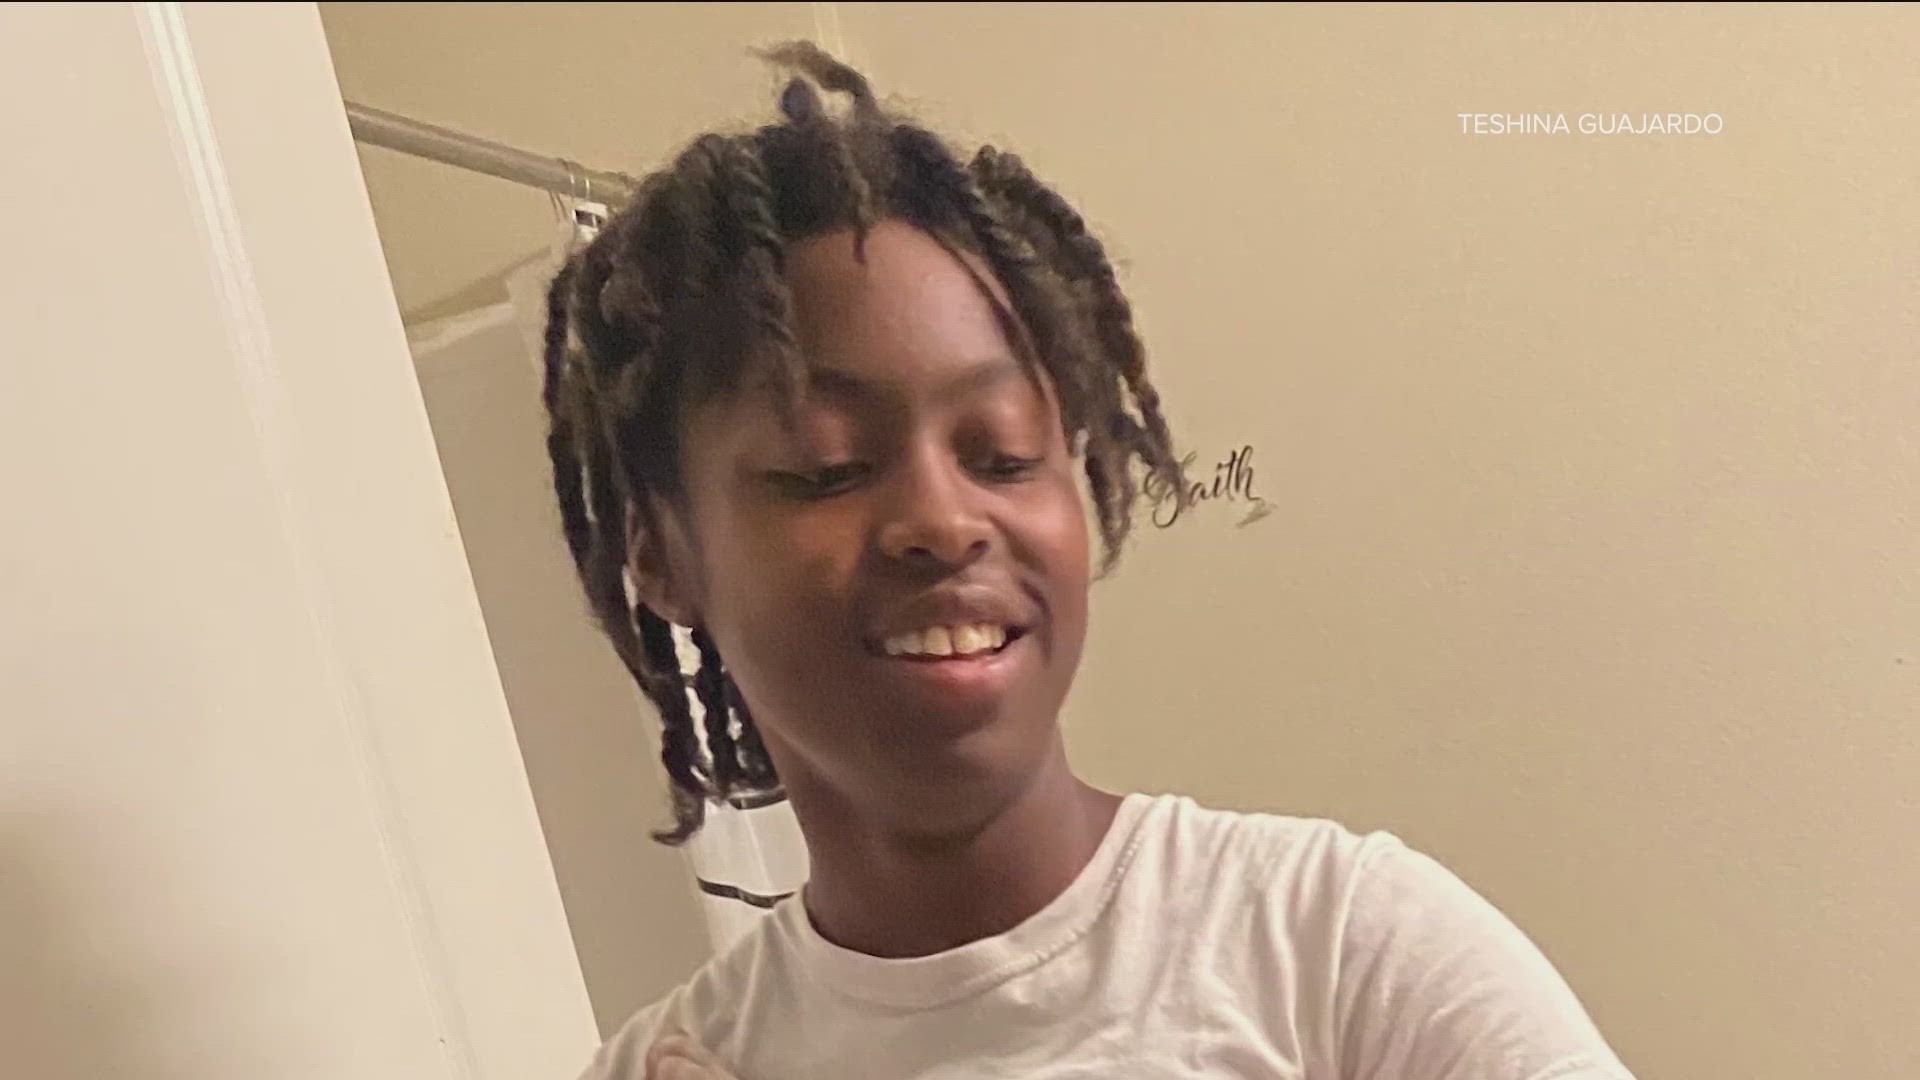 Mikalah Franklin's mother said her 14-year-old daughter died protecting her 5-year-old brother from gunfire.